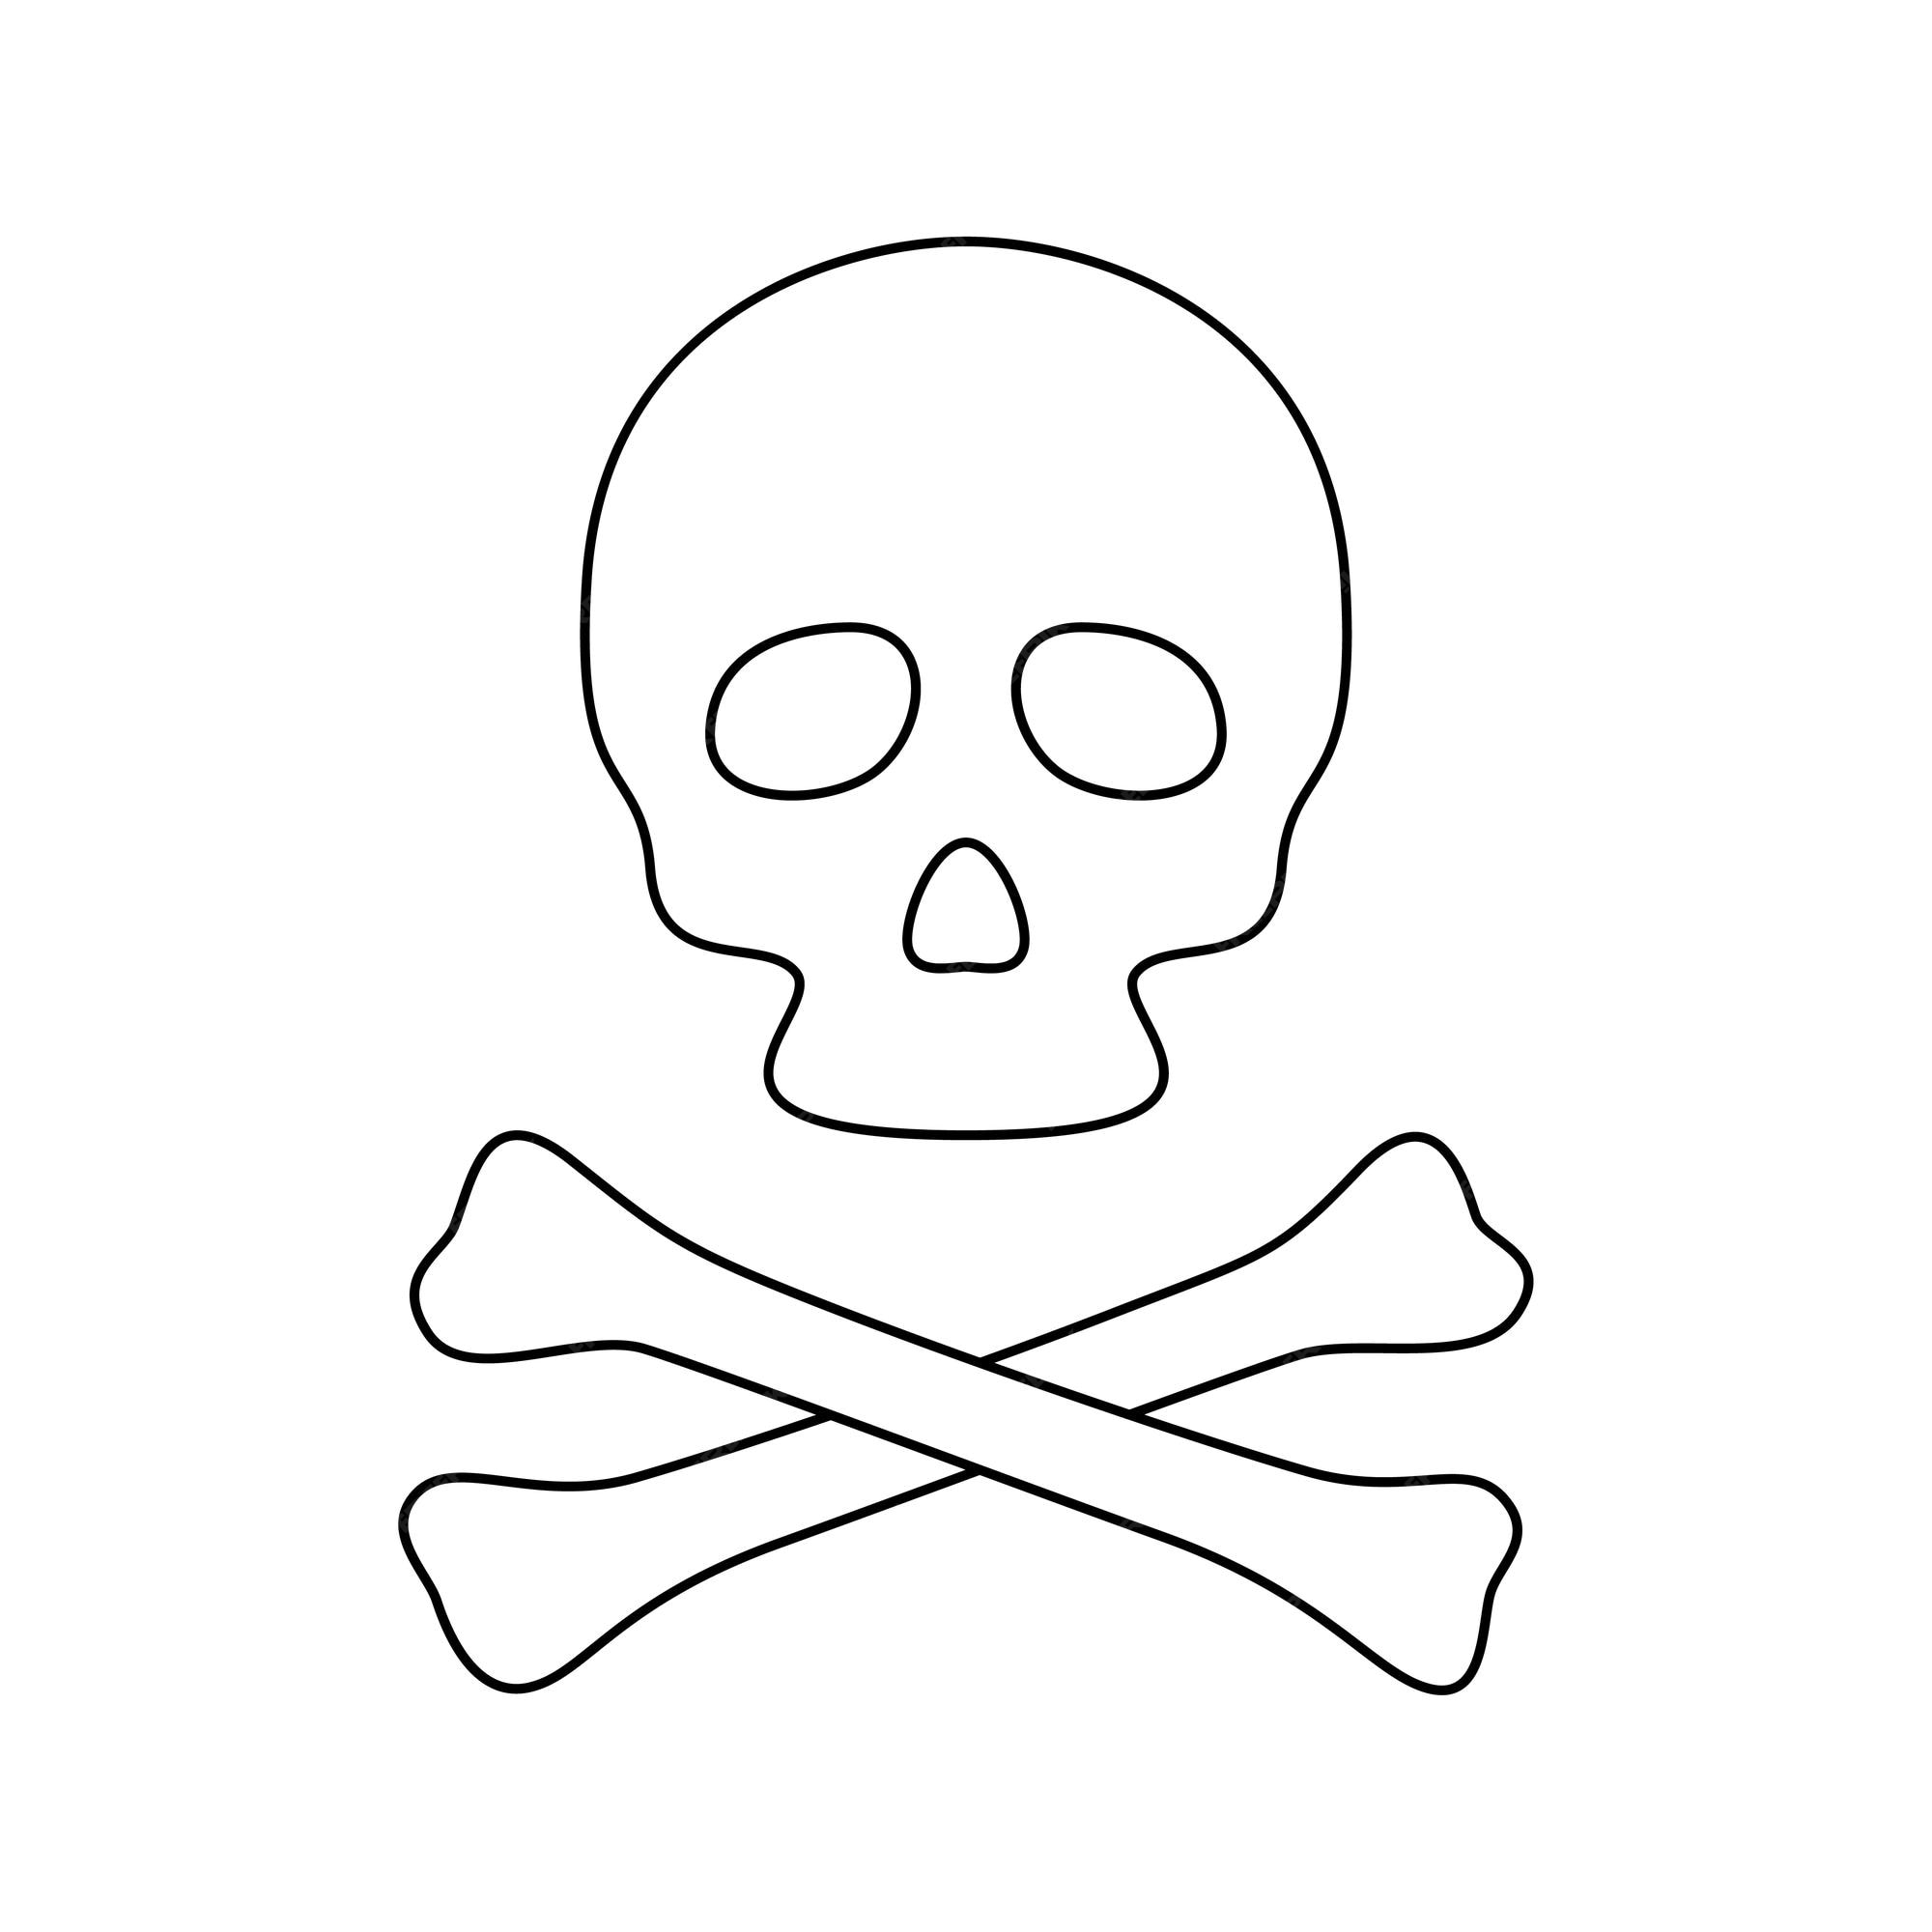 Premium vector coloring page with skull and crossbones for kids